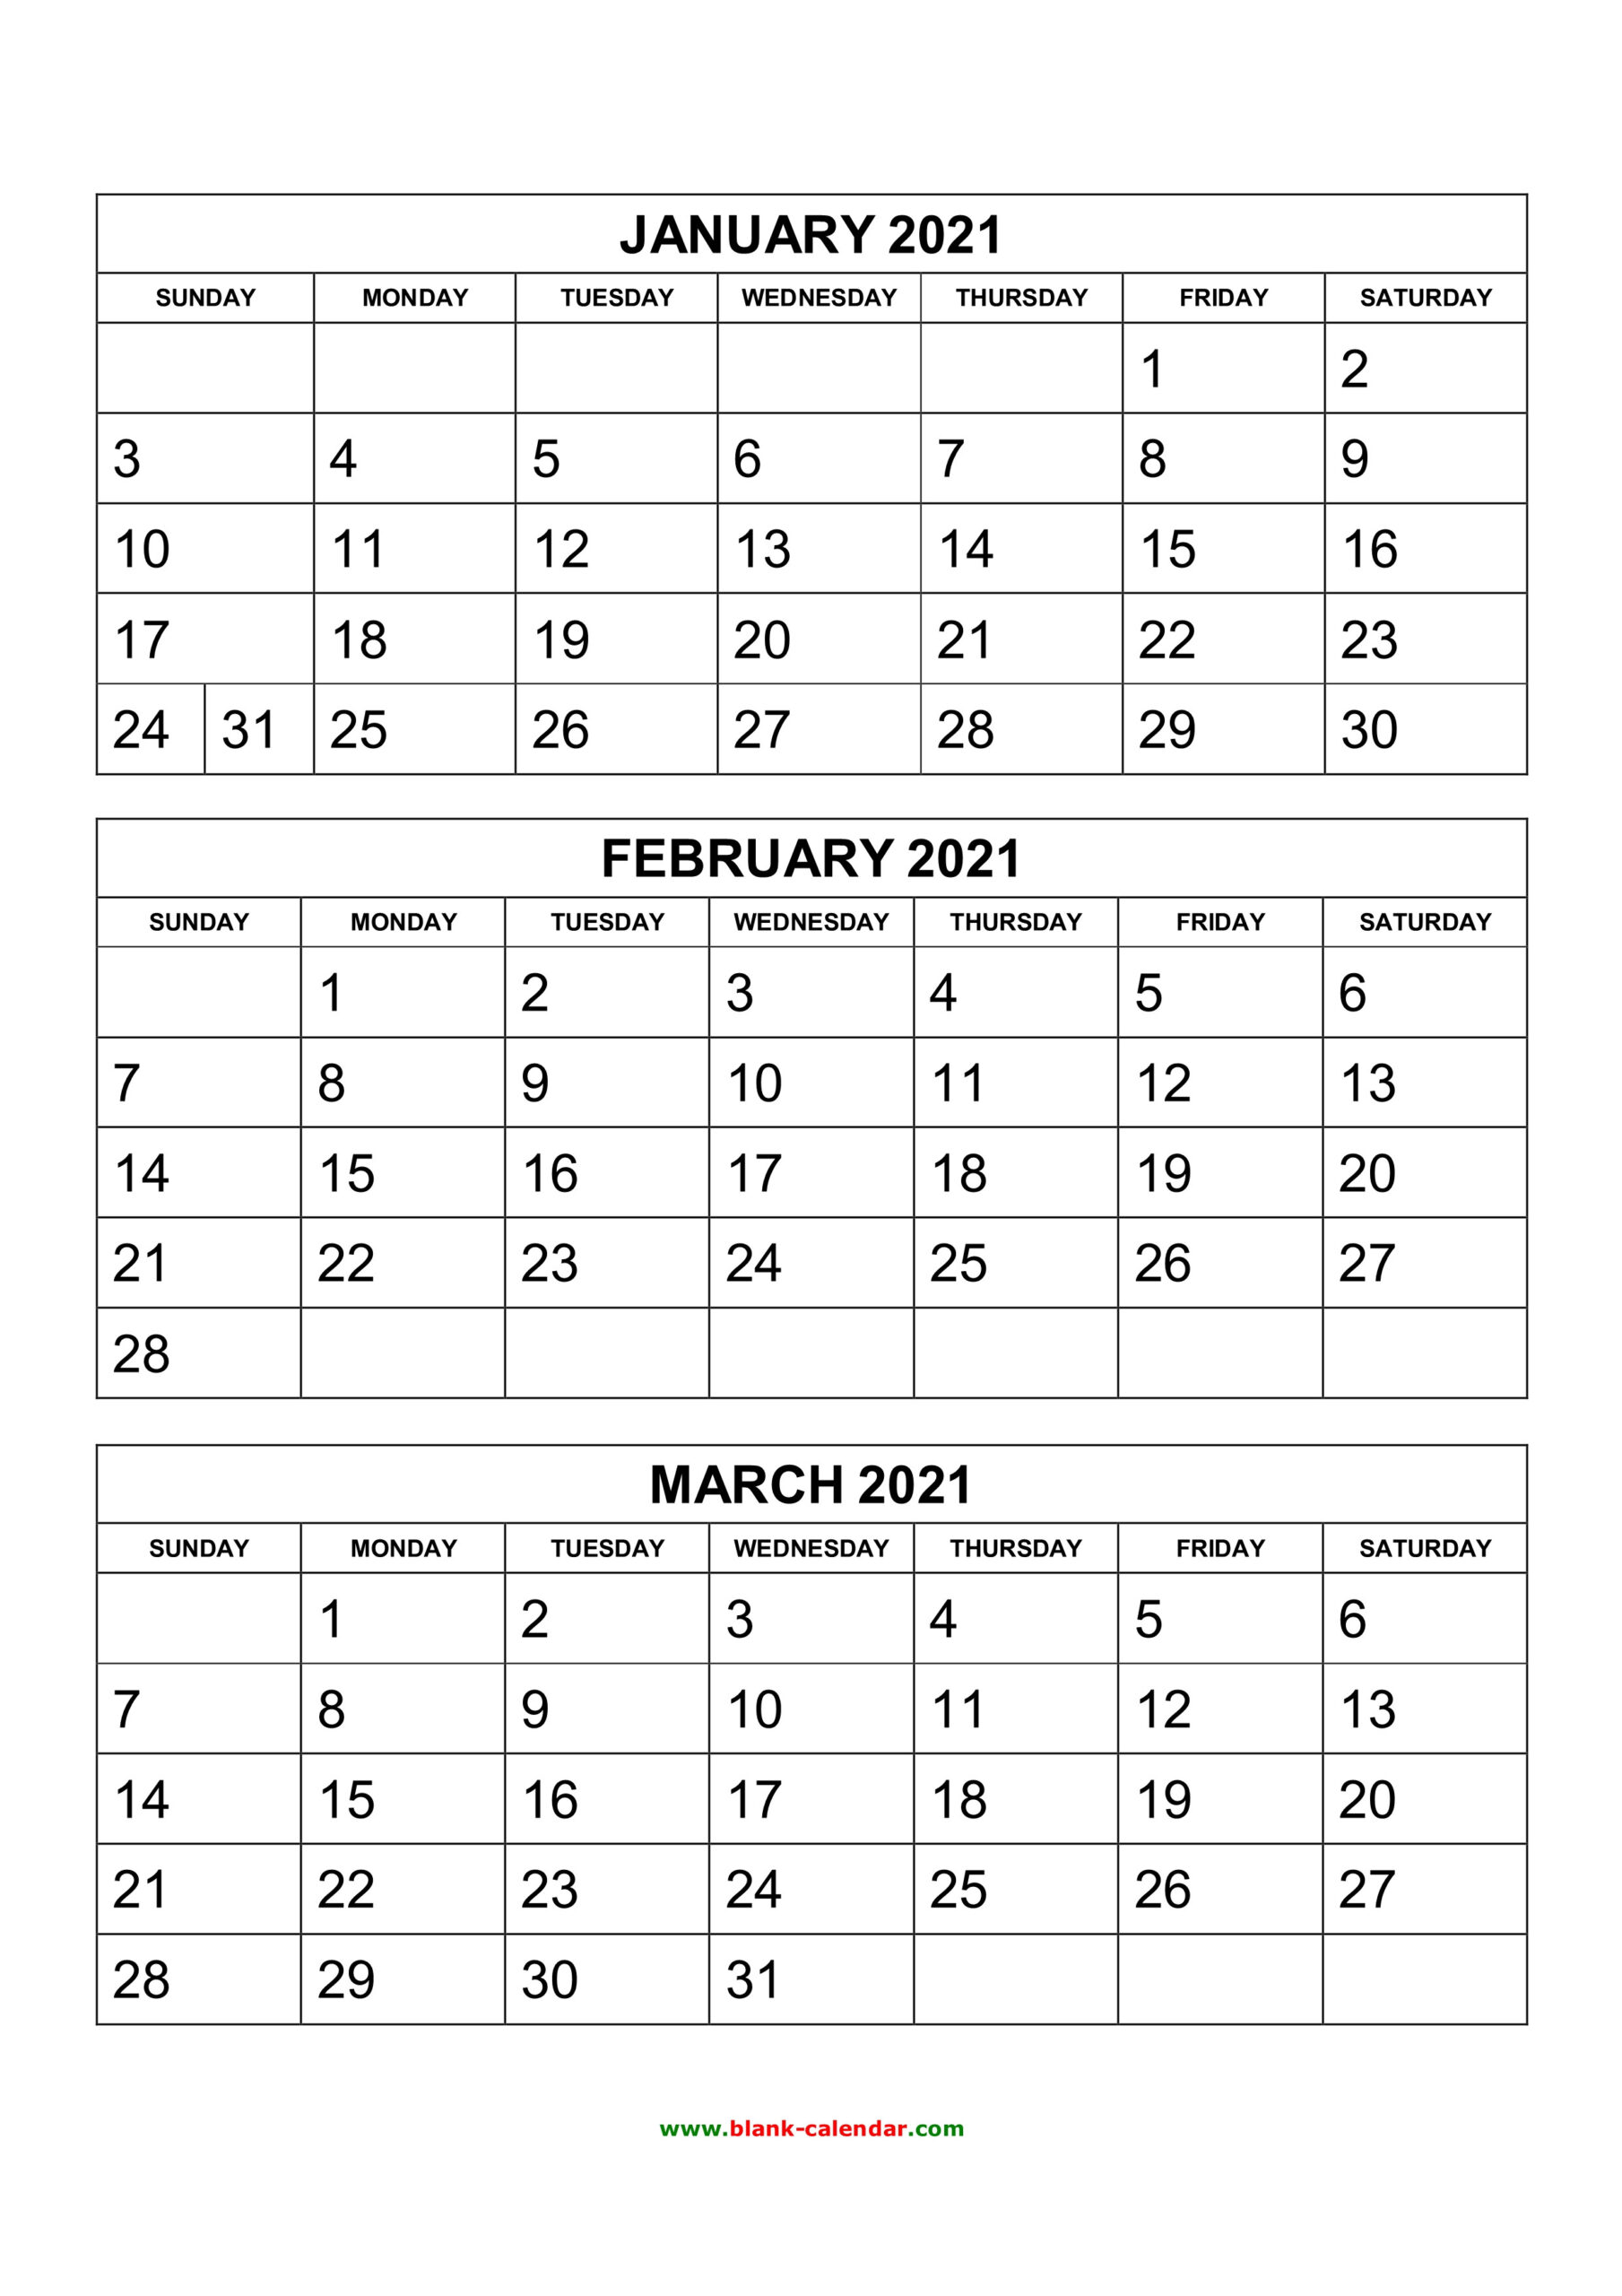 2021 Calendar 1 Month Per Page-2 Page Montly 2021 Calendar